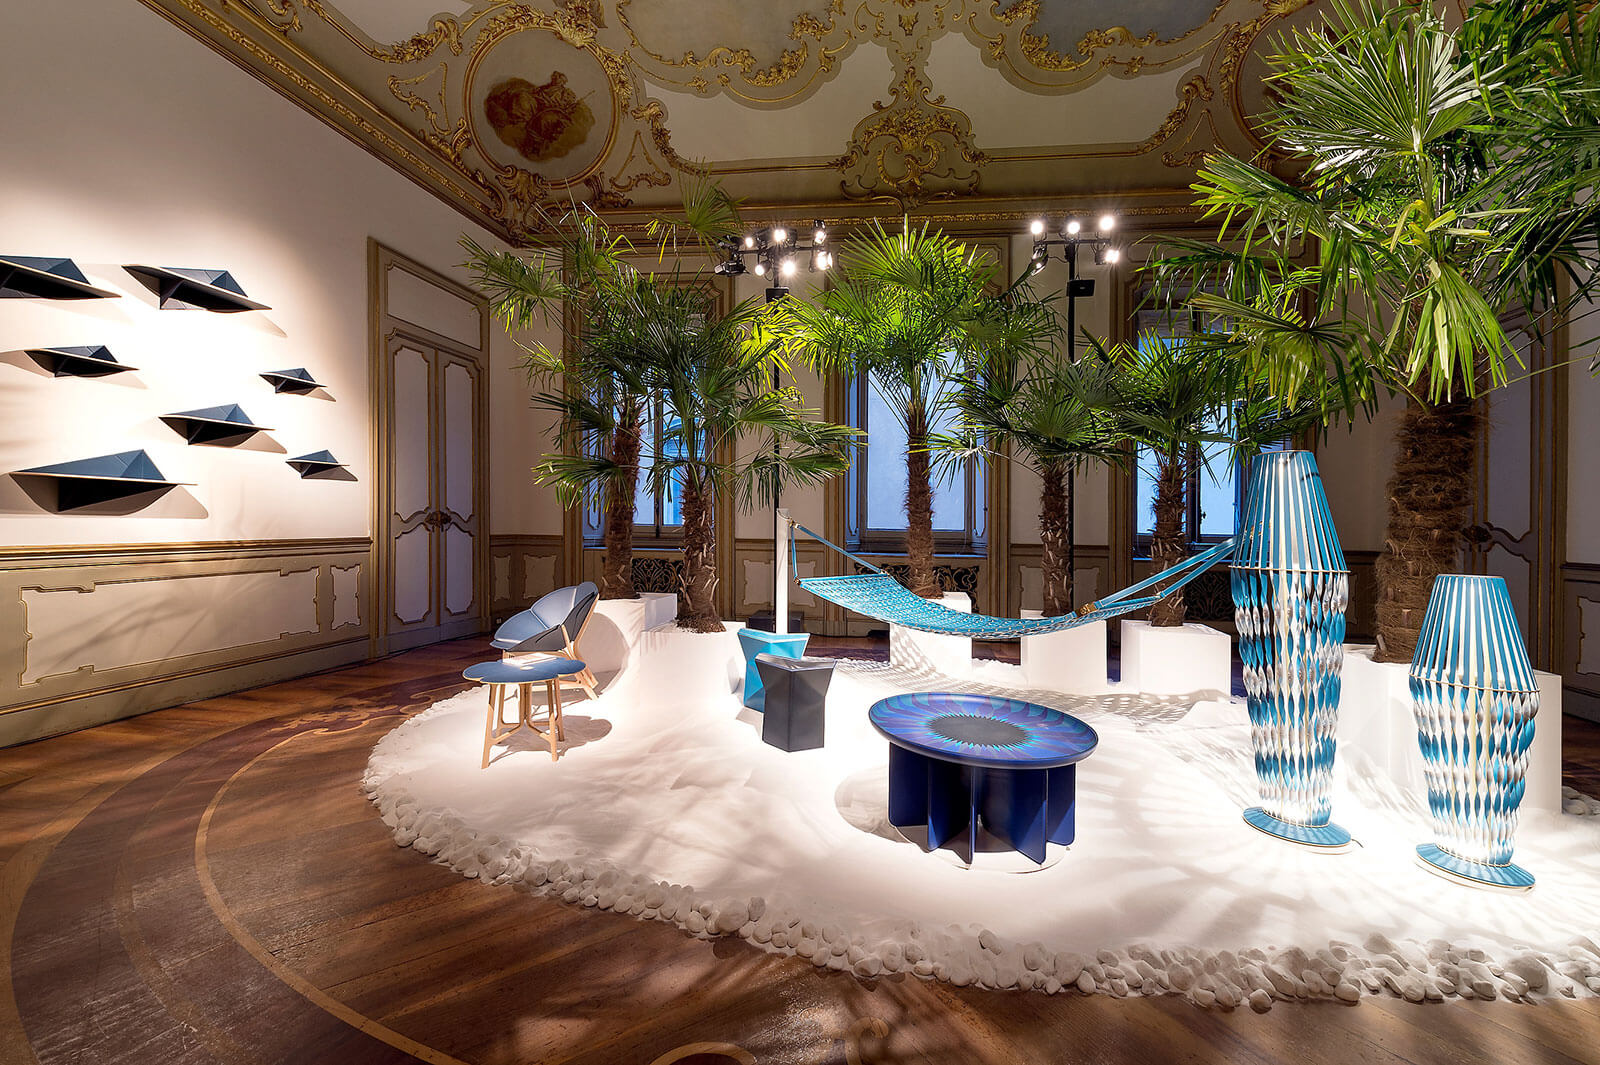 Liven up Your Interiors With Louis Vuitton's Objets Nomades Collection